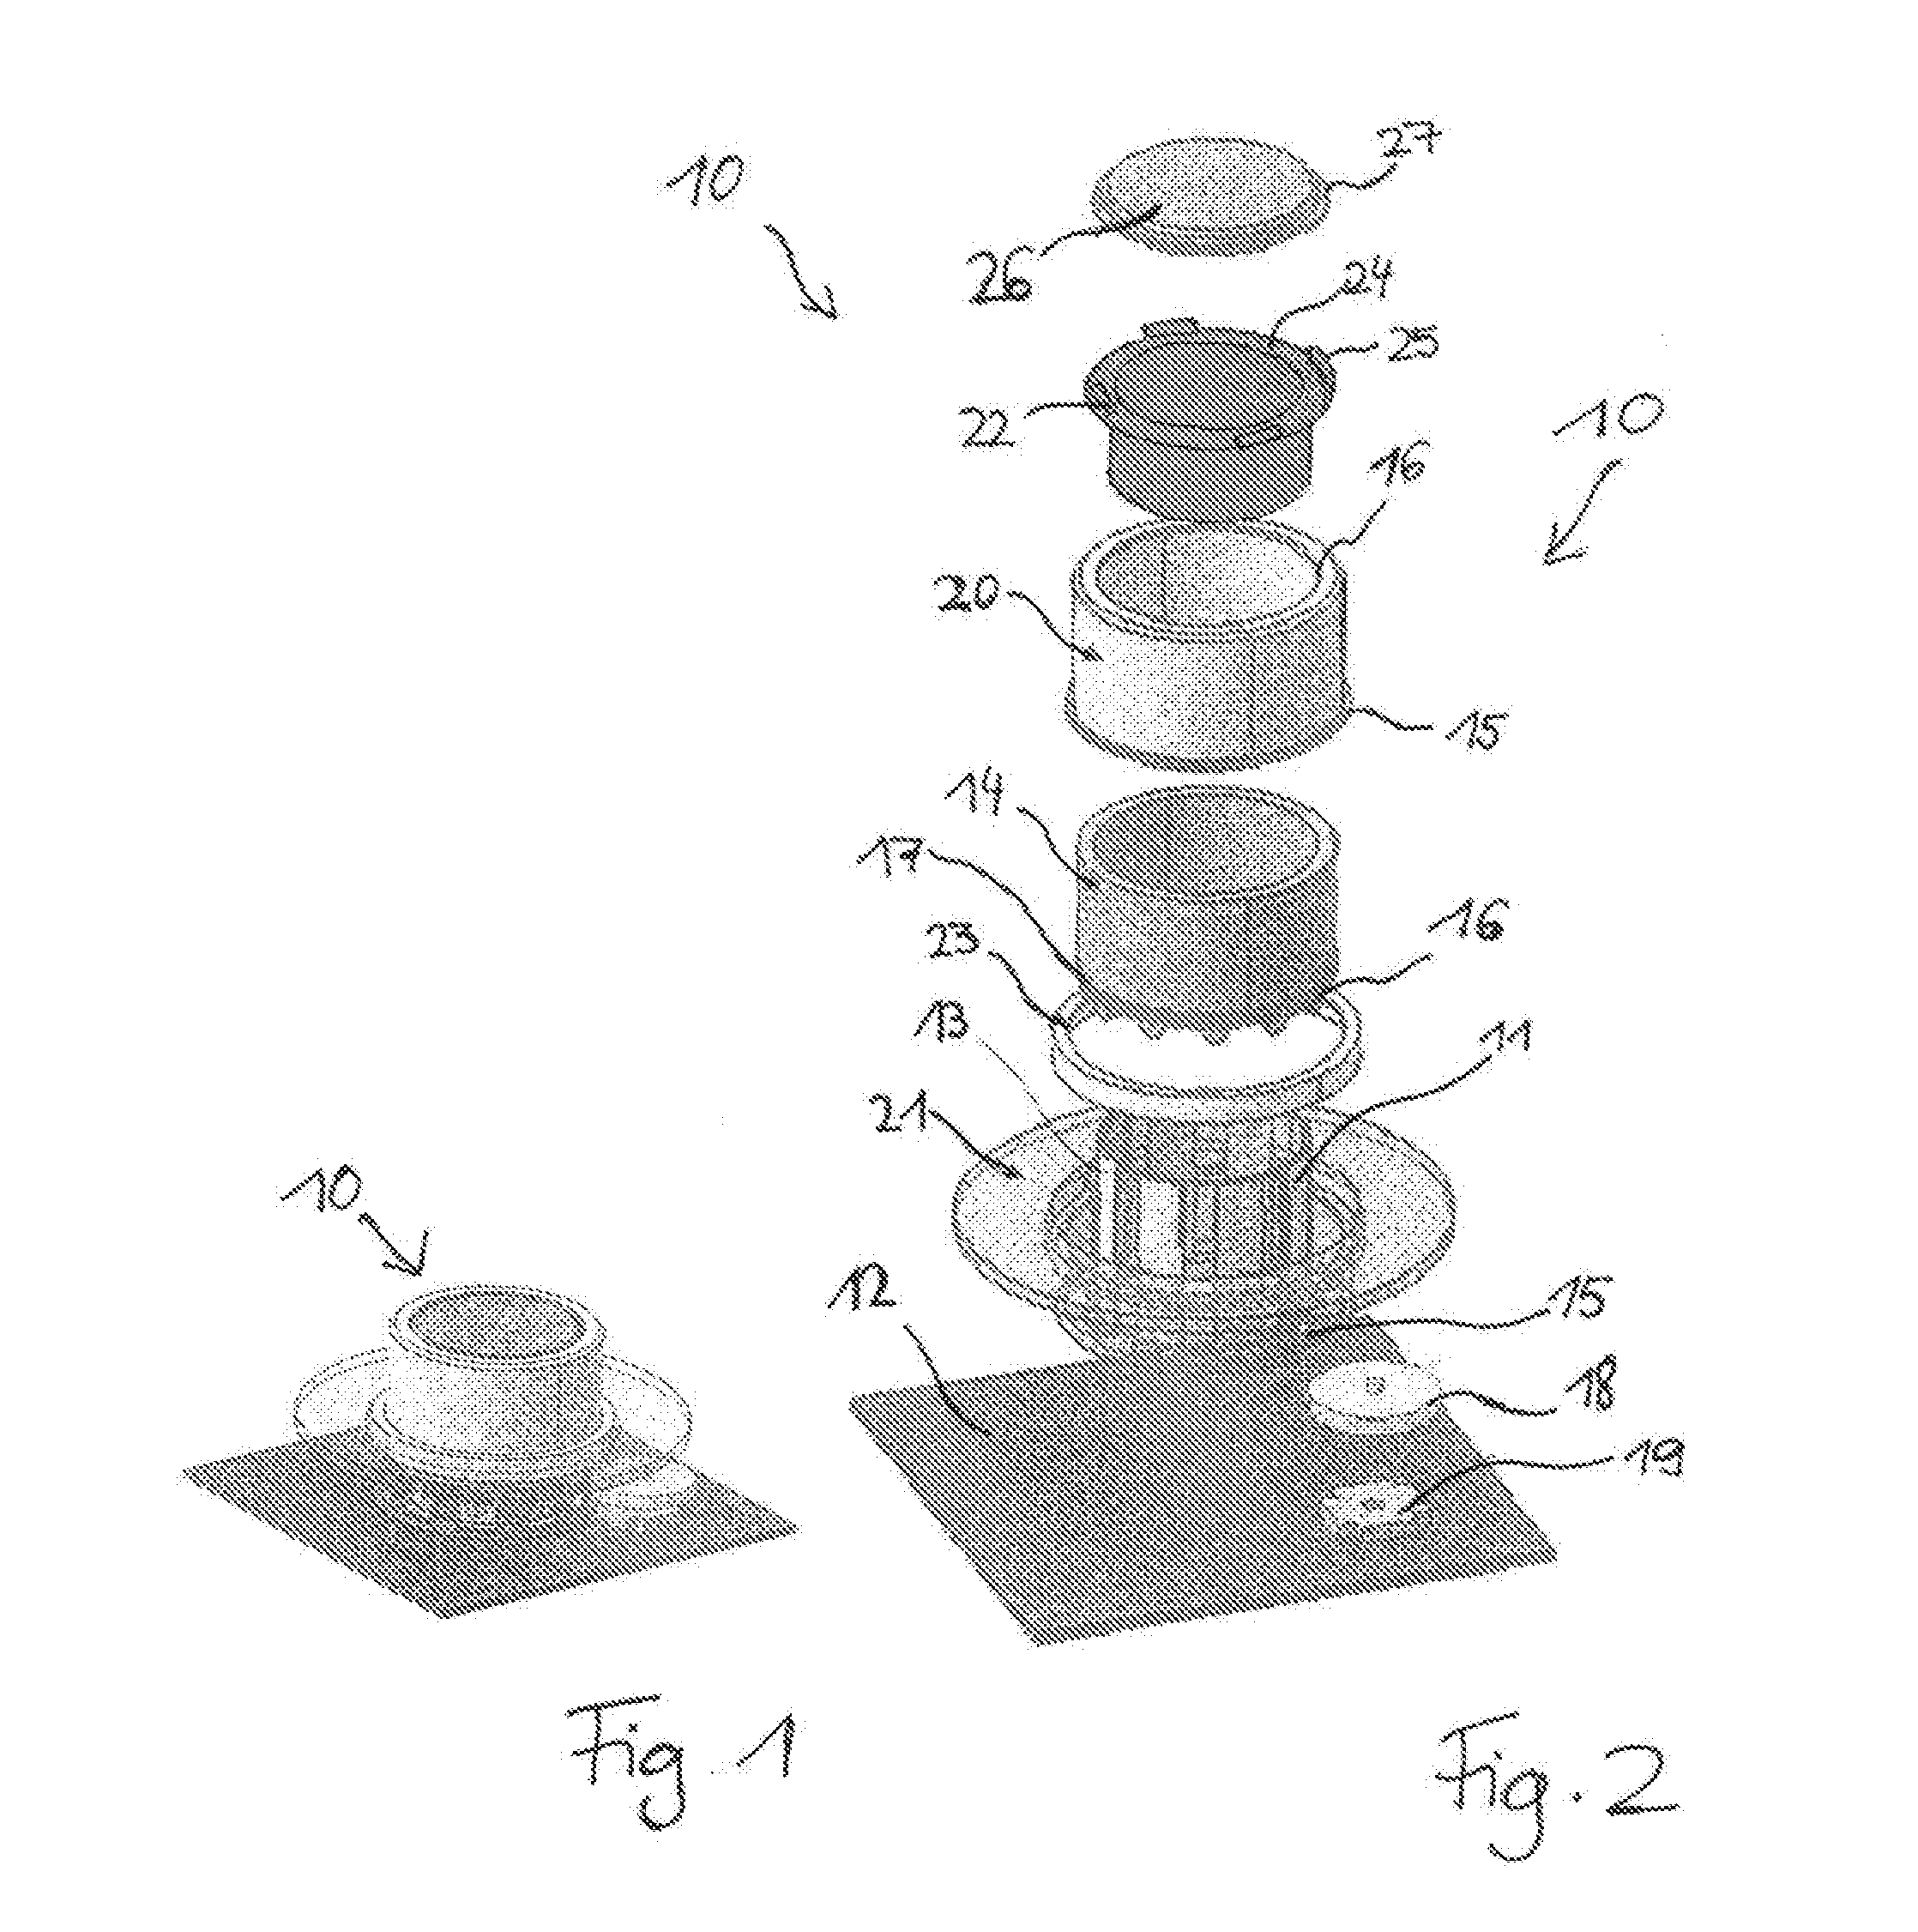 Capacitive sensing node integration to a surface of a mechanical part